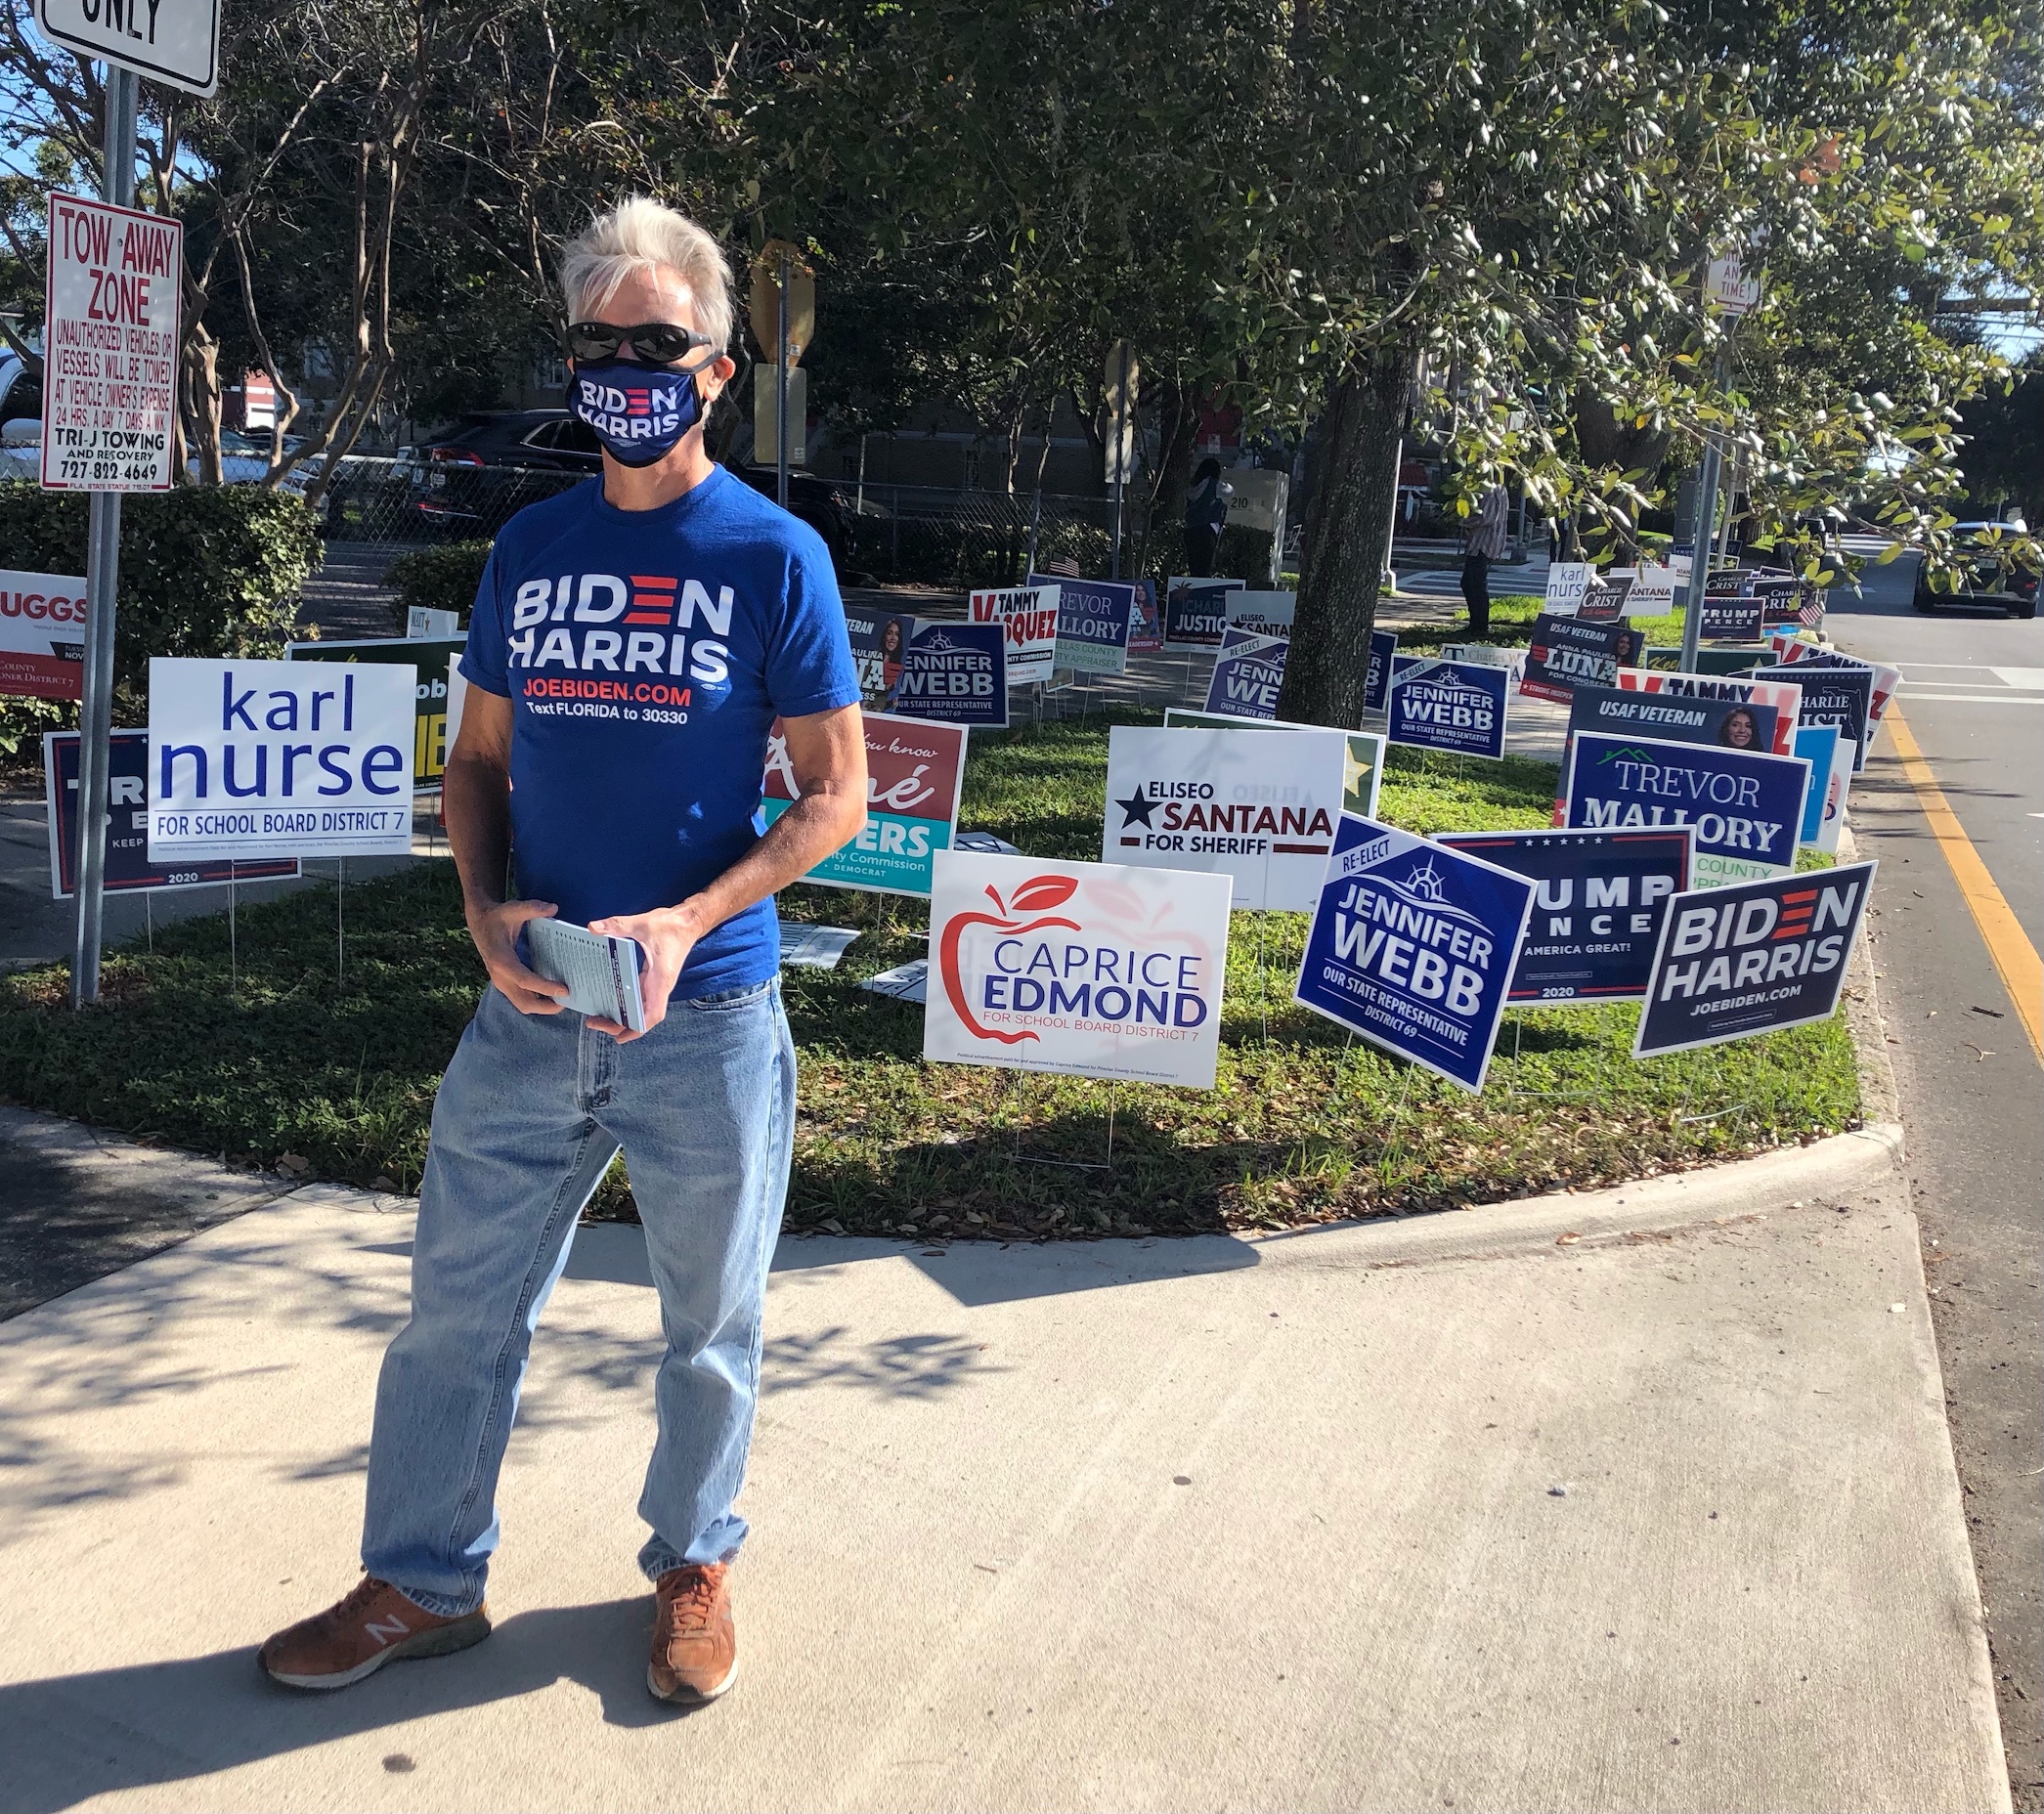 Robert, originally British but a registered US voter for almost a decade, stands outside a polling place to show his support for presidential nominee Joe Biden on 3 November (MEE/Sheren Khalel)